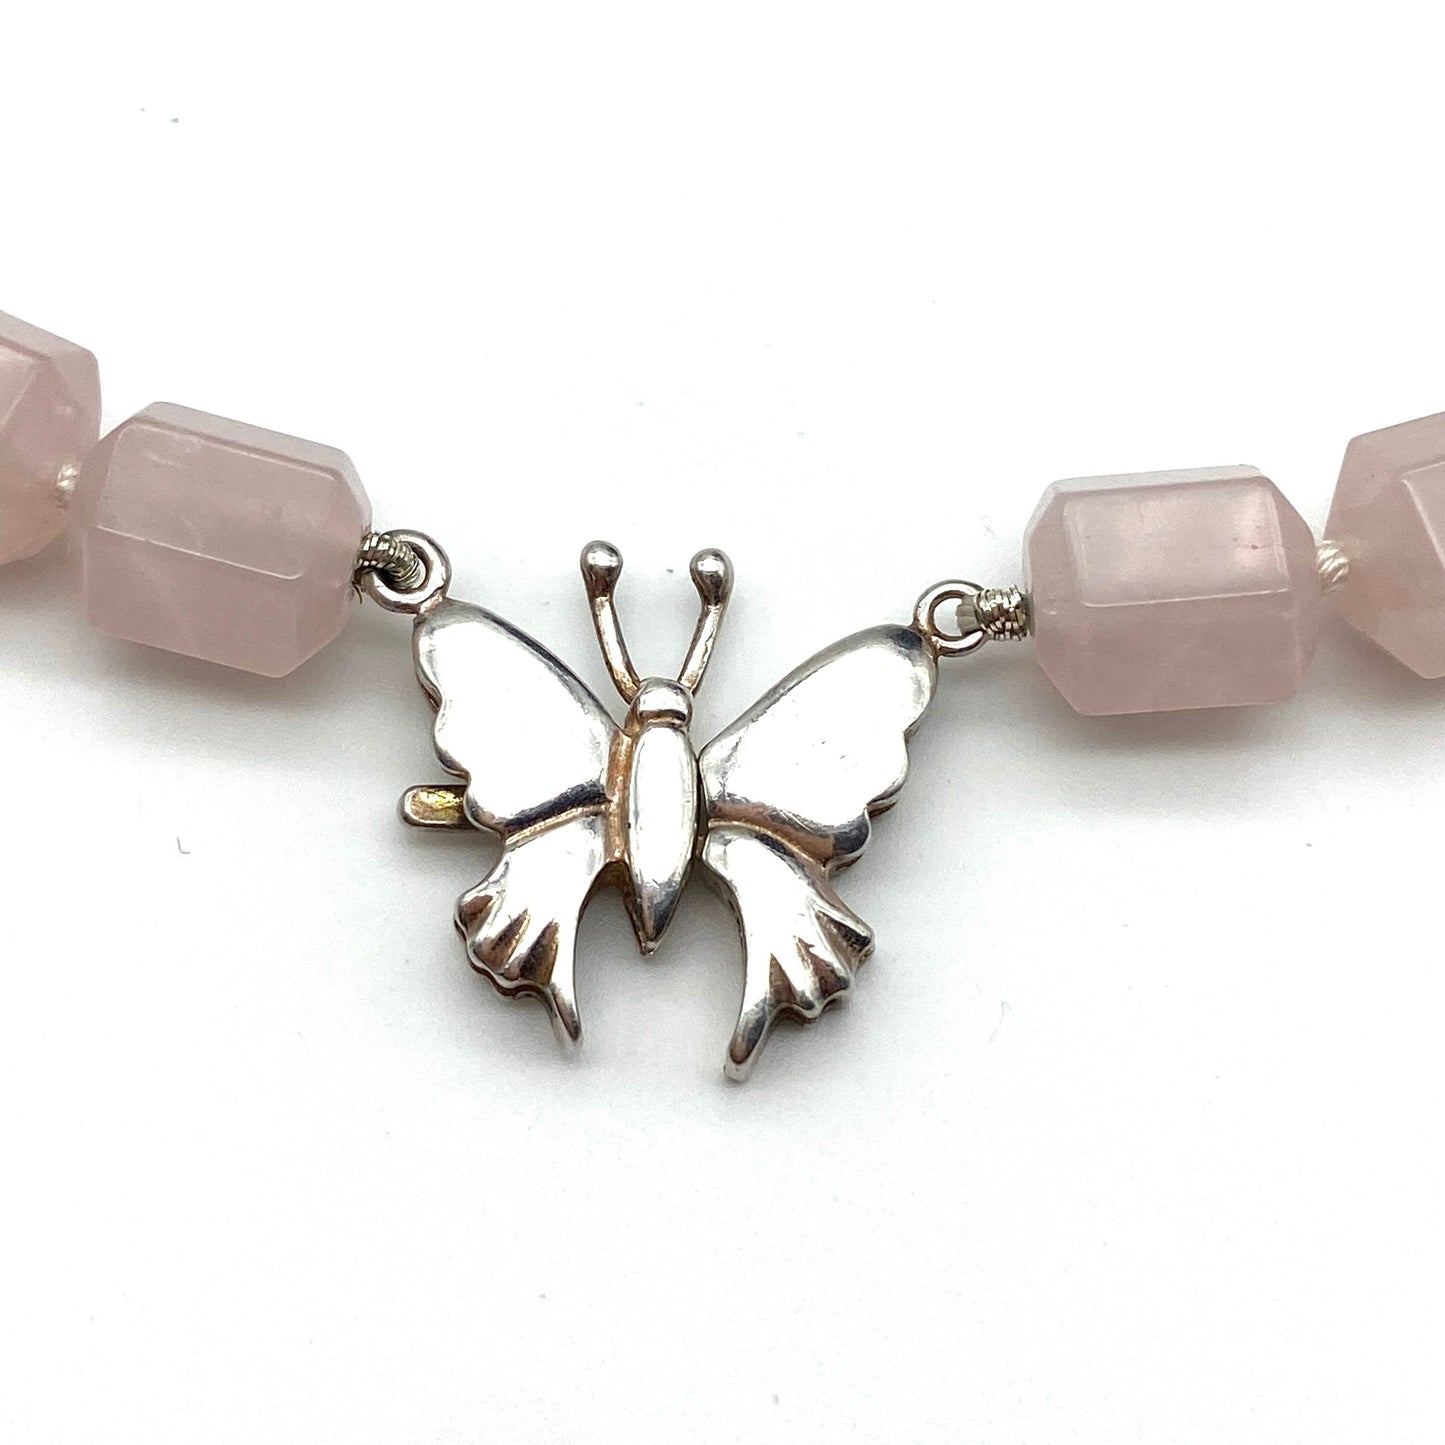 Rose Quartz Knotted Bead Necklace with 925 Silver Butterfly Clasp